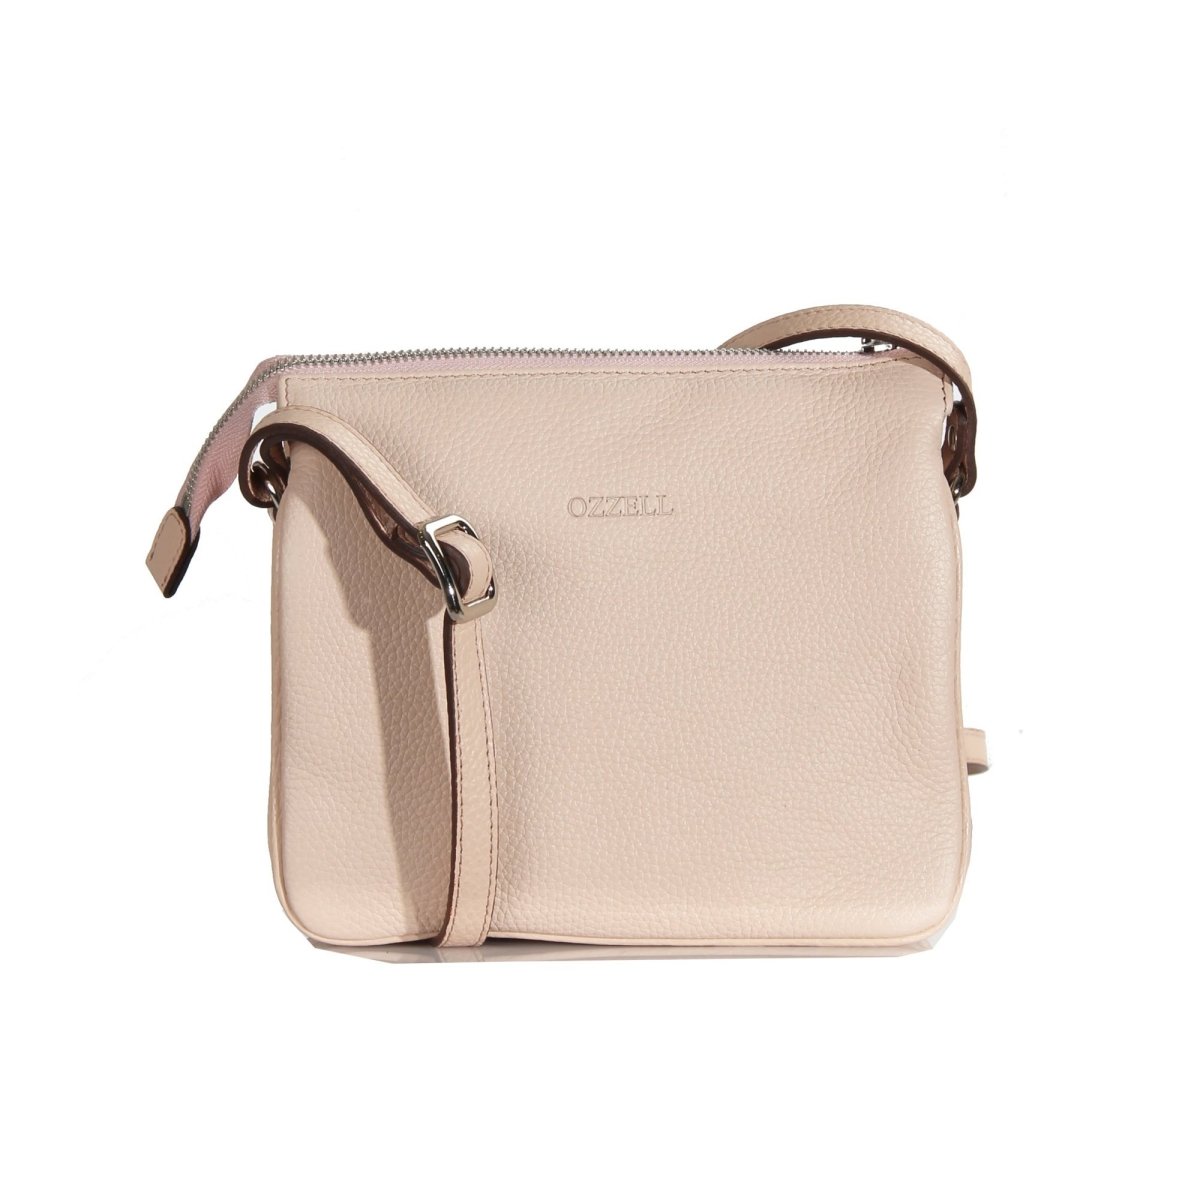 Cross body Bag Leather Small Ozzell Bag - Ozzell London